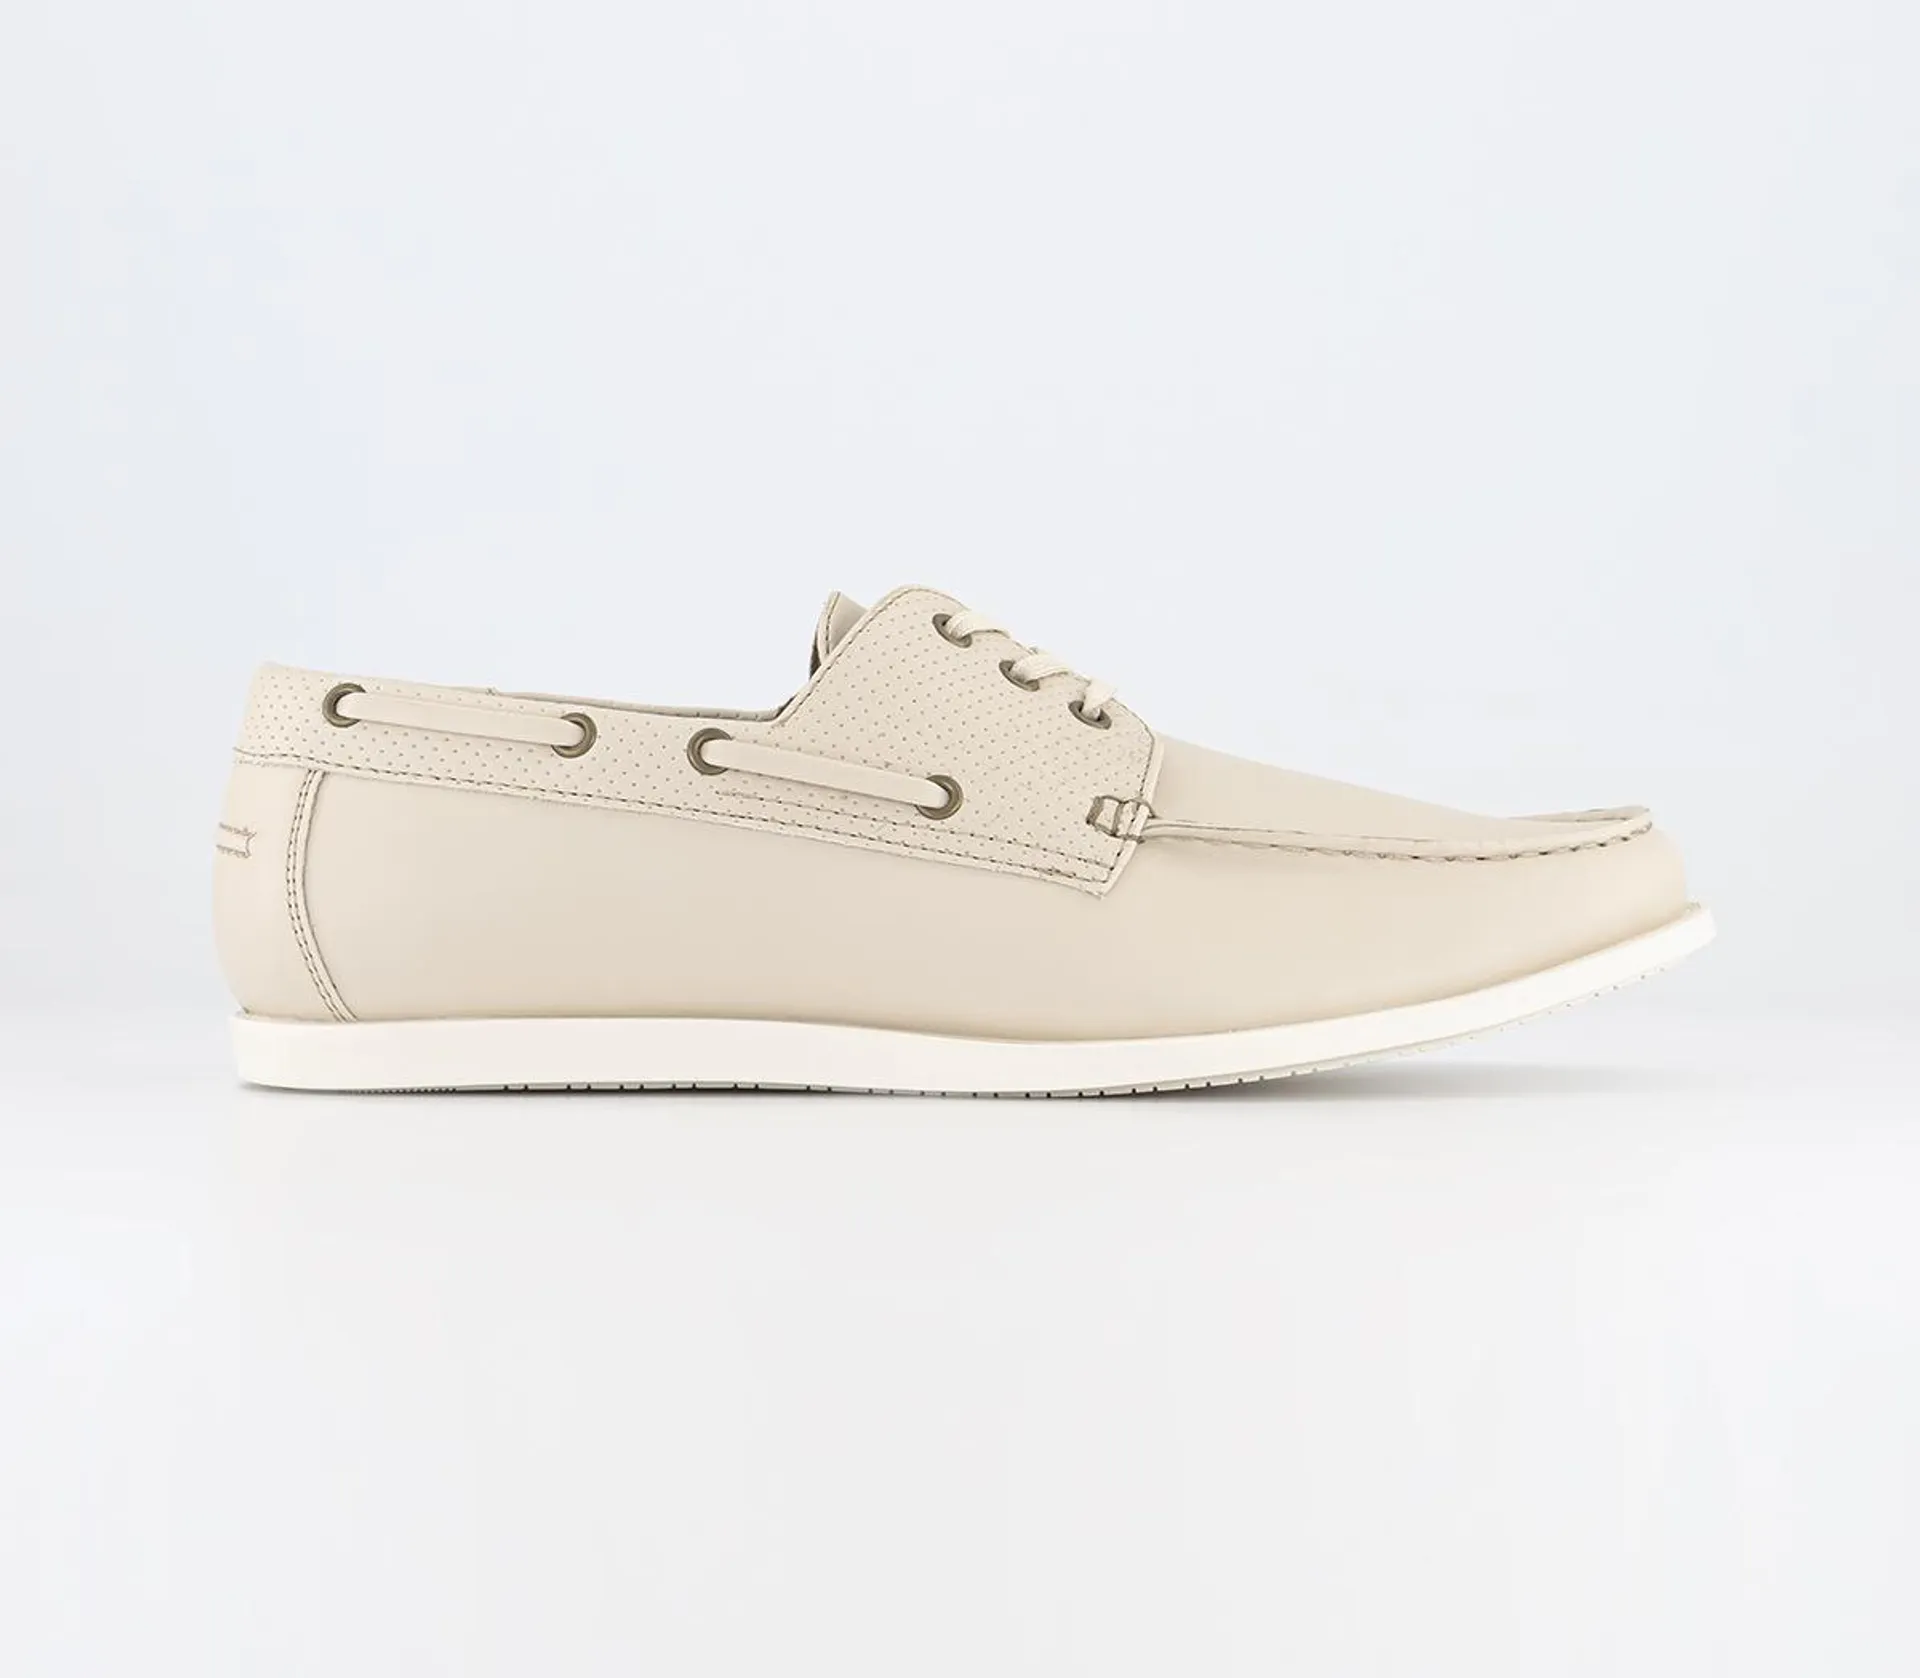 Creed Boat Shoes